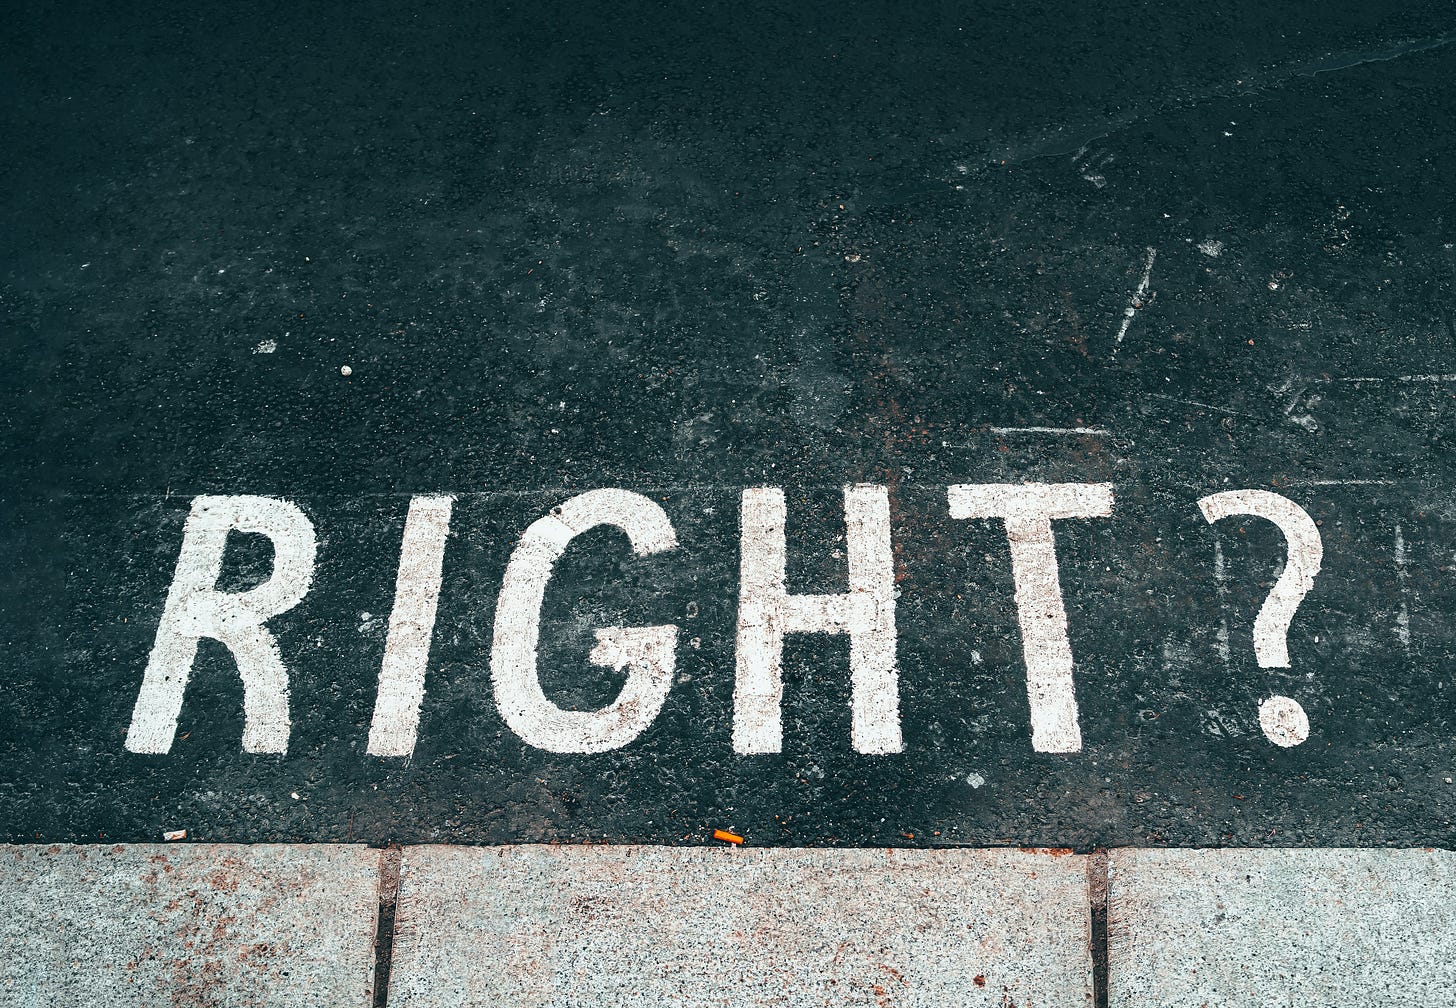 An image of the word "Right?" painted in capital letters on a street.